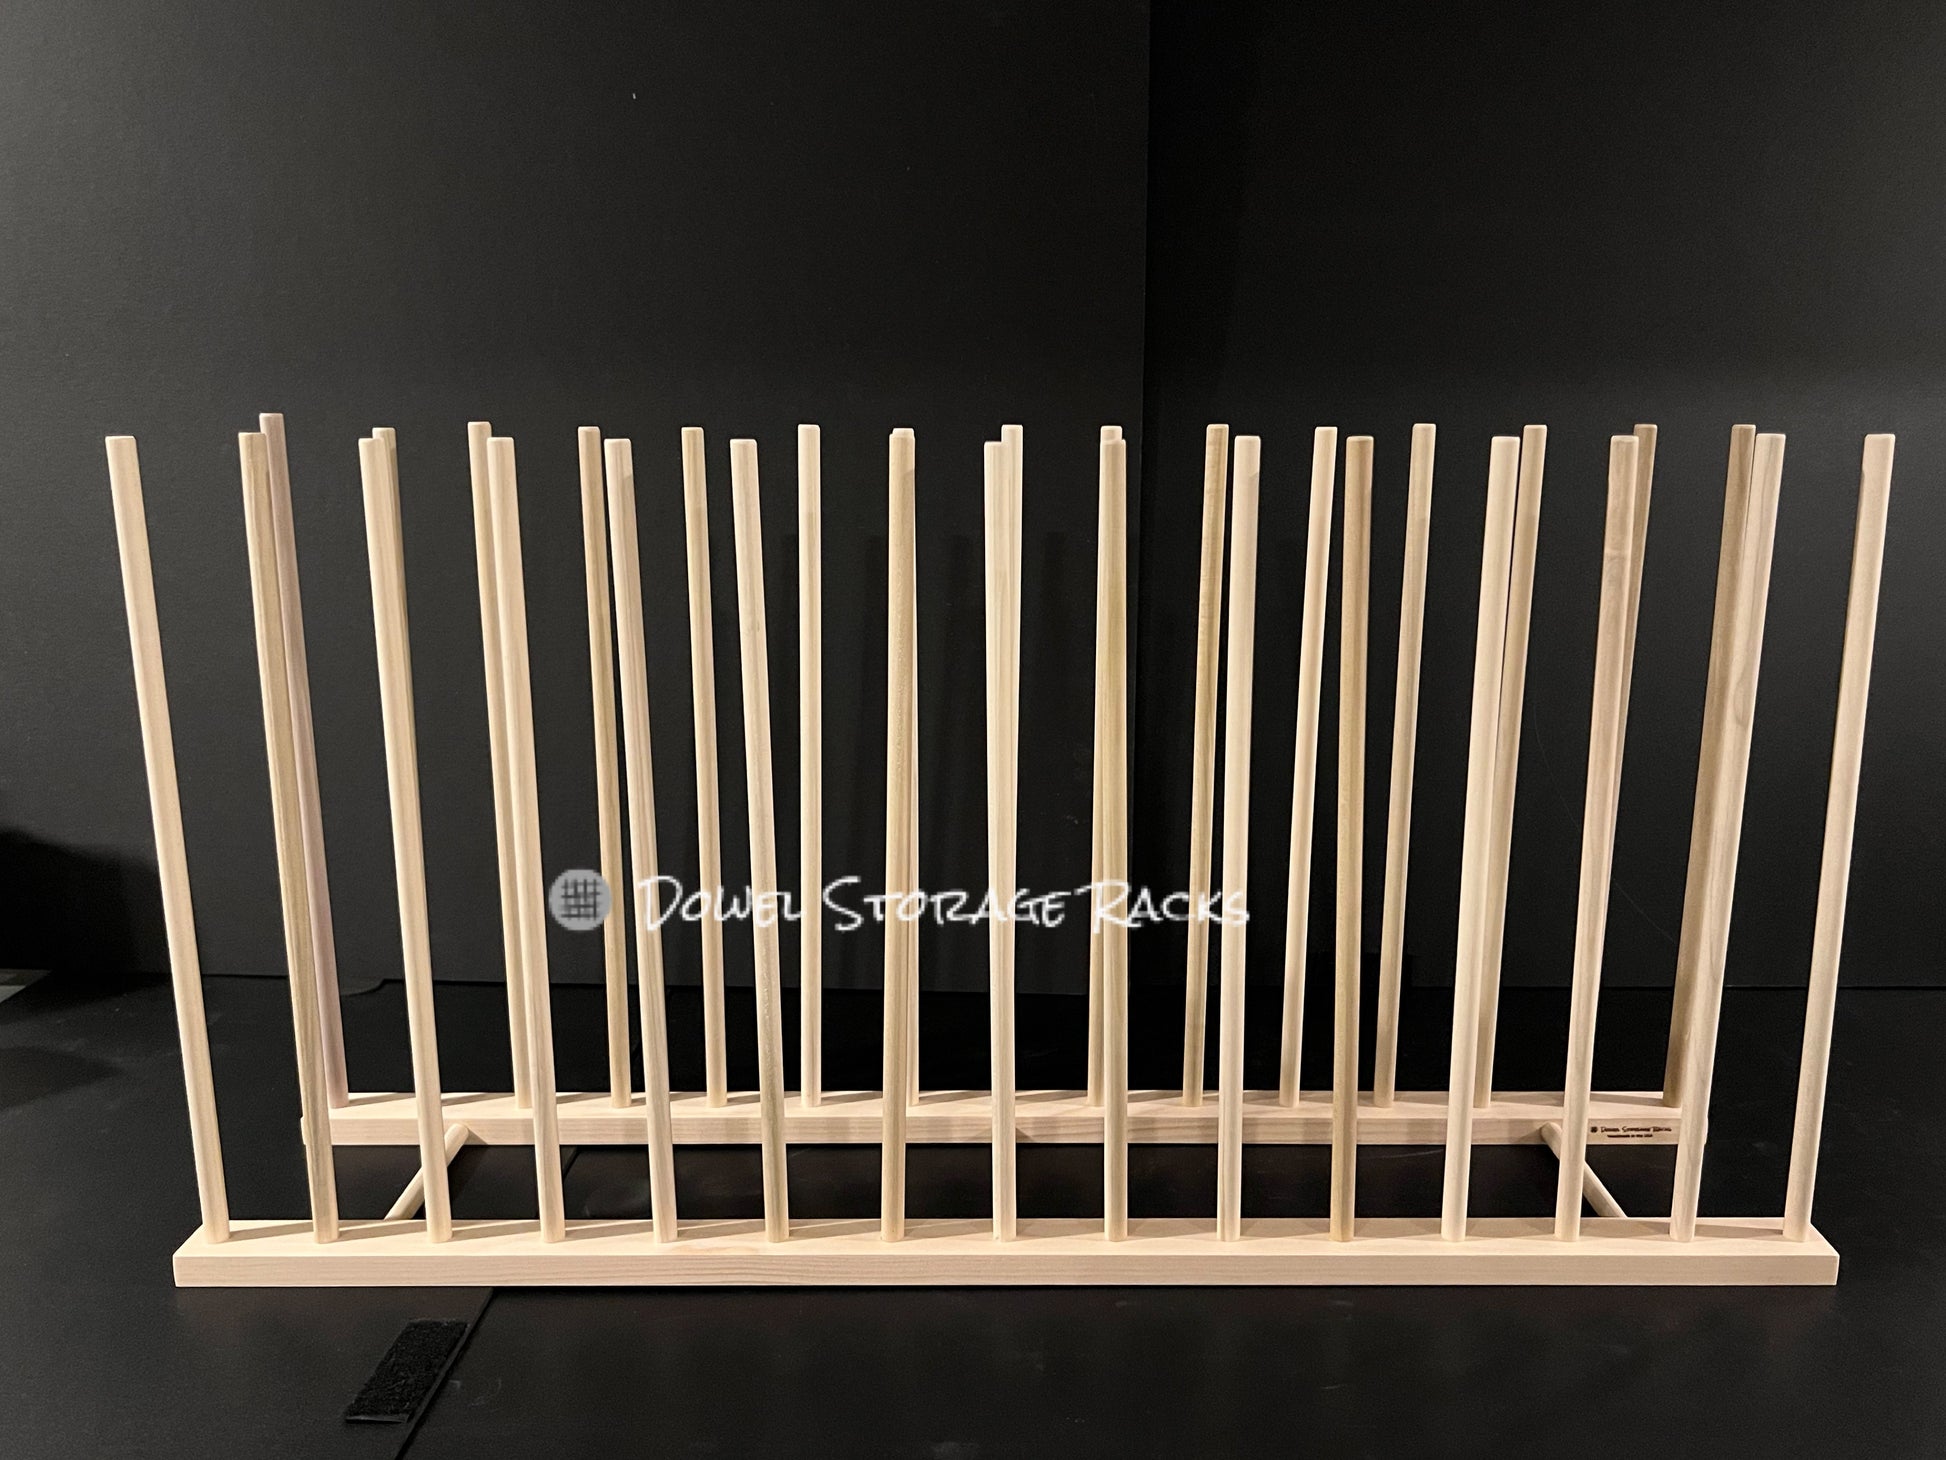 Adjustable Art Storage Rack 24 Long X 11 Wide With 24 Tall Dowels